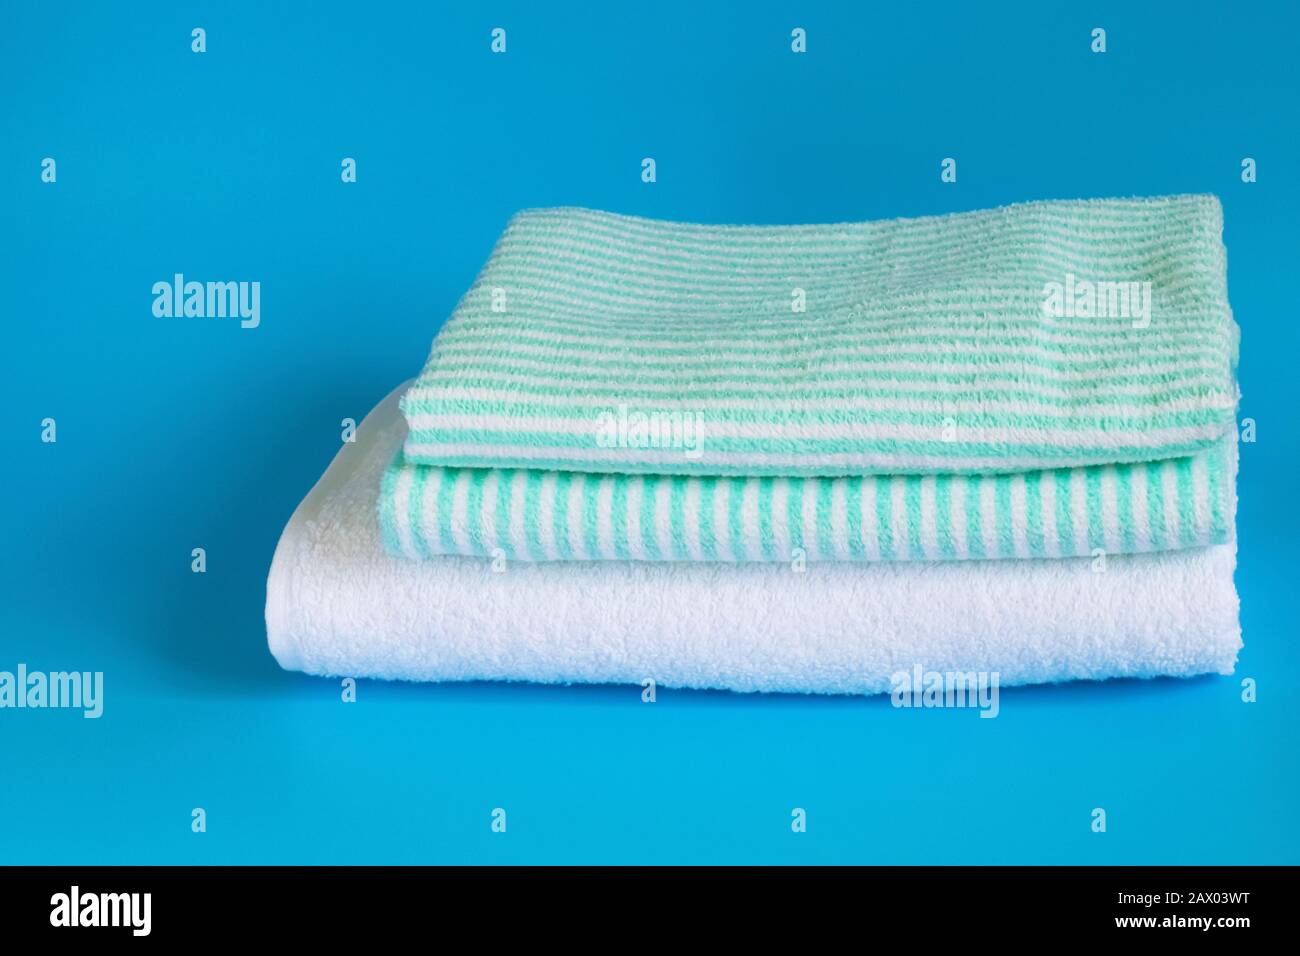 Soft terry cotton towel on a blue background. Bath towel. Personal hygiene items. Stock Photo